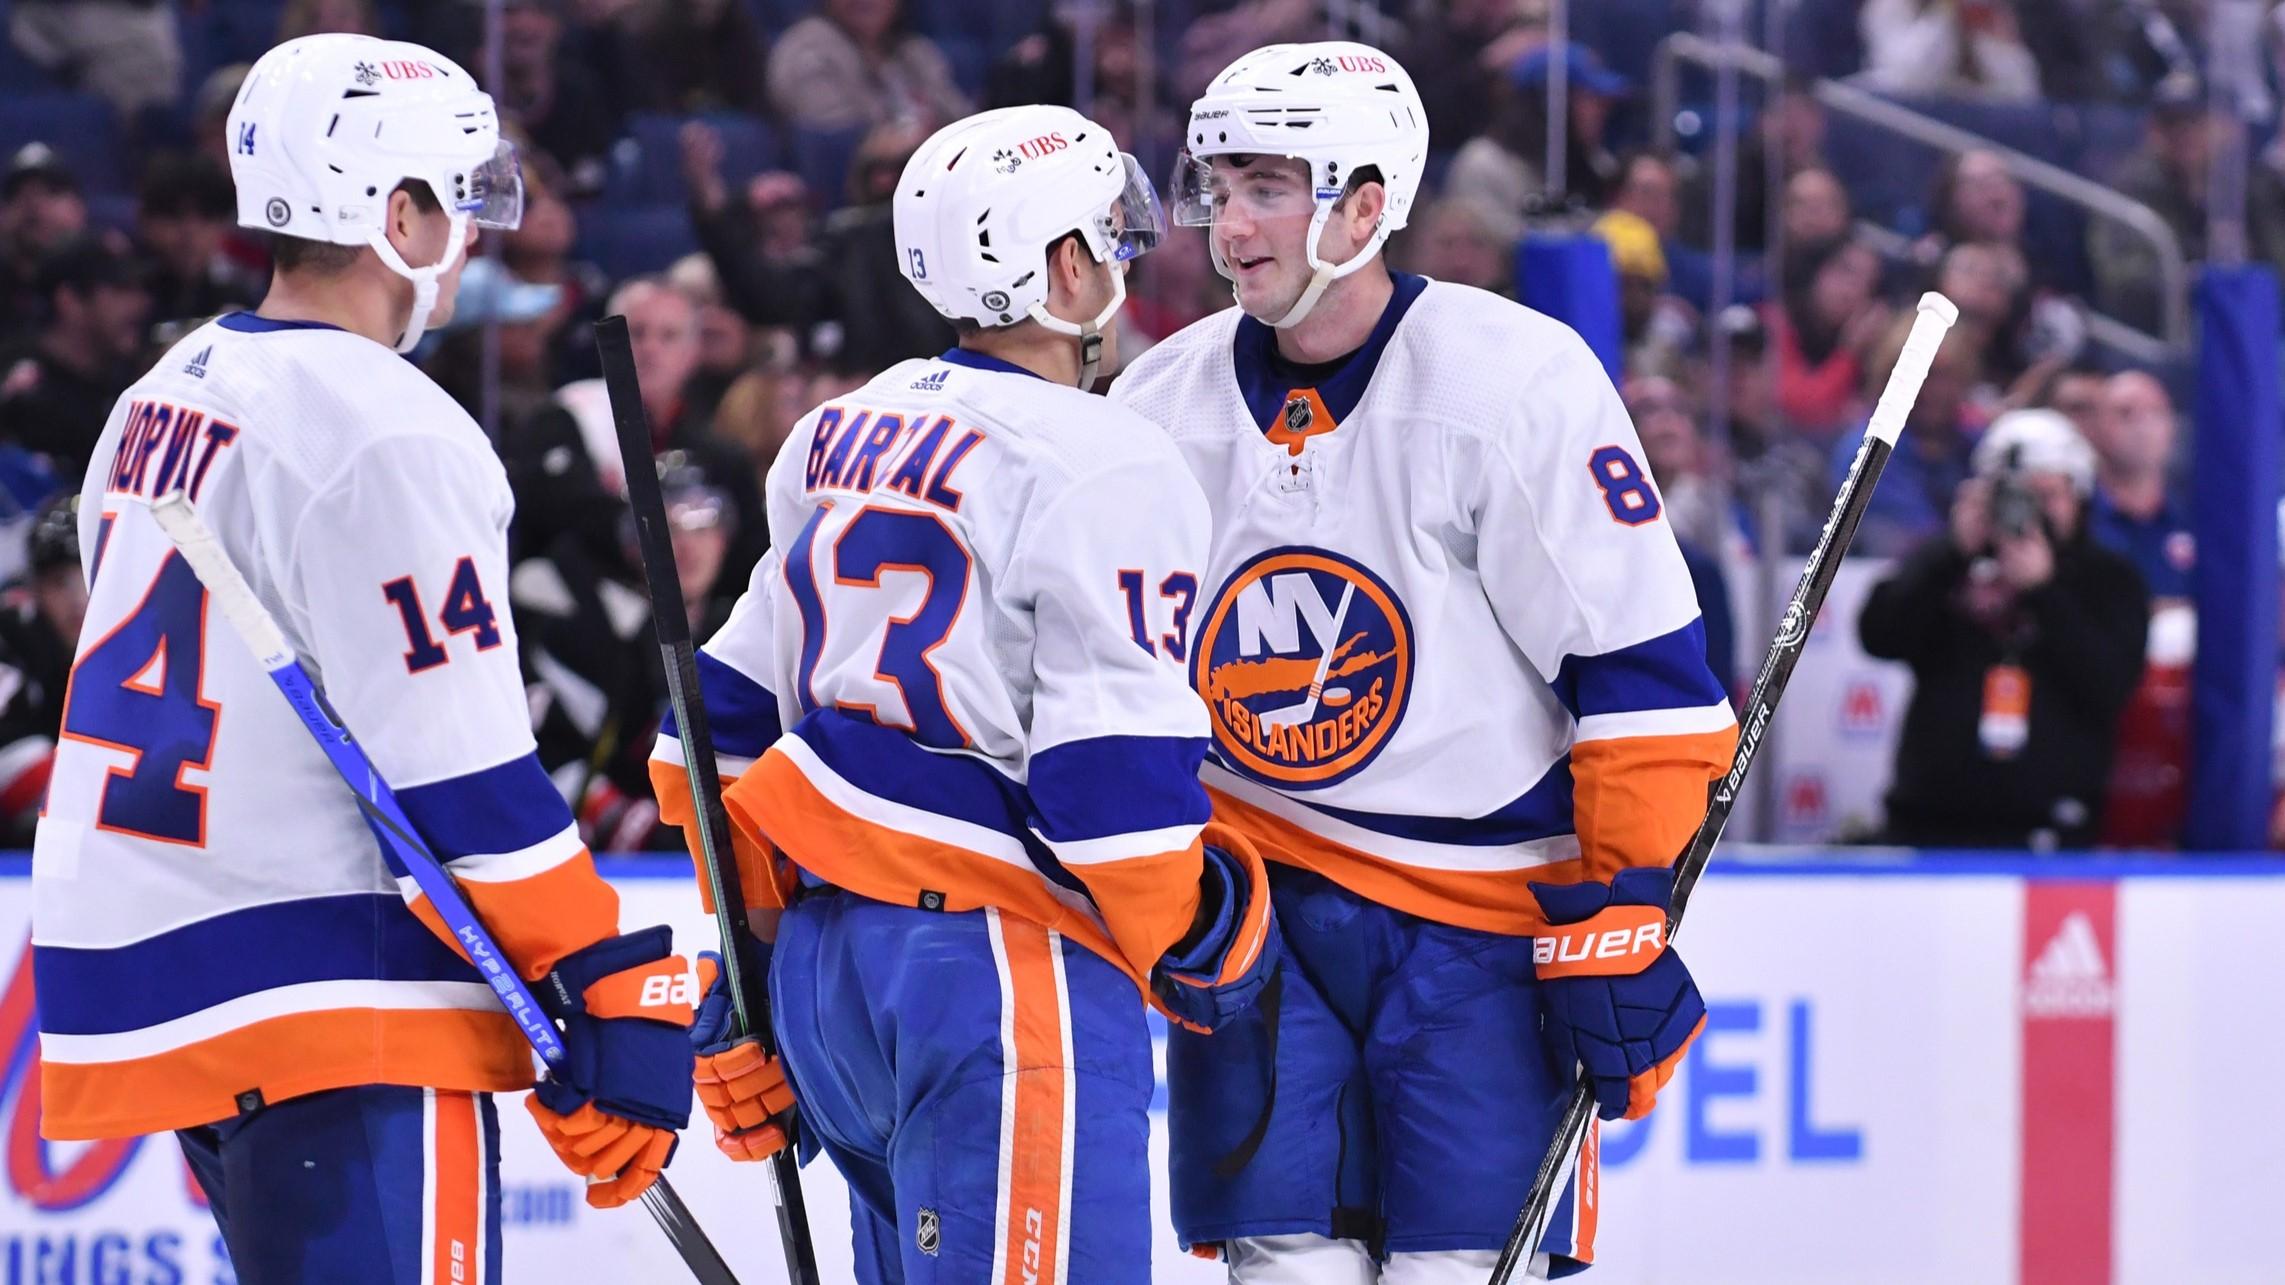 New York Islanders defenseman Noah Dobson (8) is congratulated by center Mathew Barzal (13) and center Bo Horvat (14) after scoring a goal against the Buffalo Sabres in the third period at KeyBank Center. / Mark Konezny-USA TODAY Sports